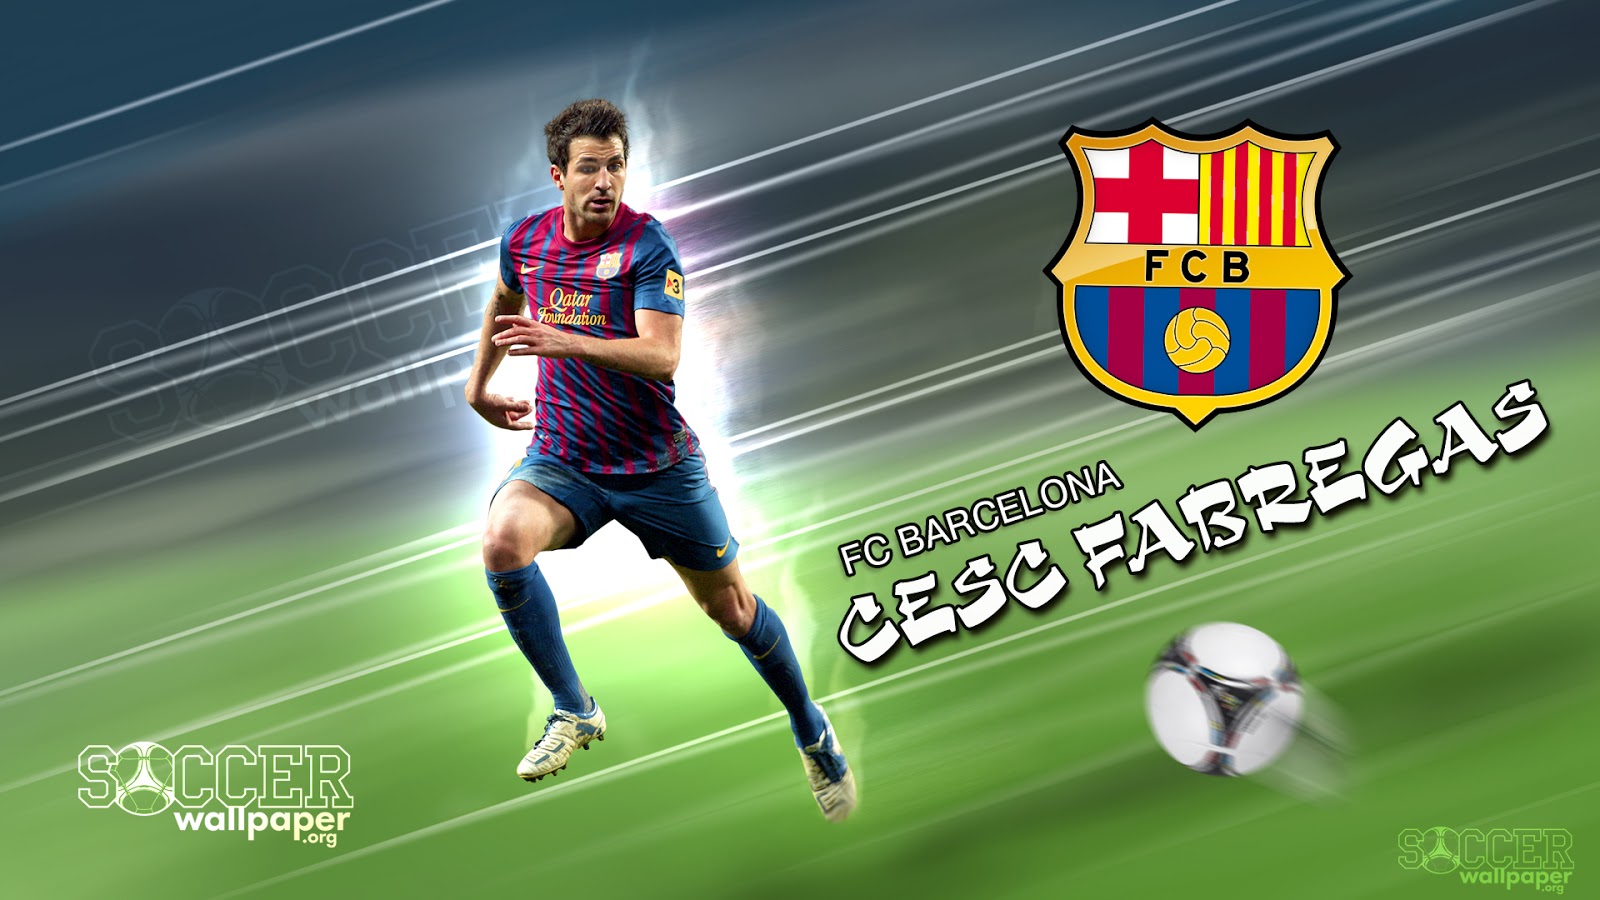  with other wallpapers of Cesc Fabregas Wallpaper as often as possible